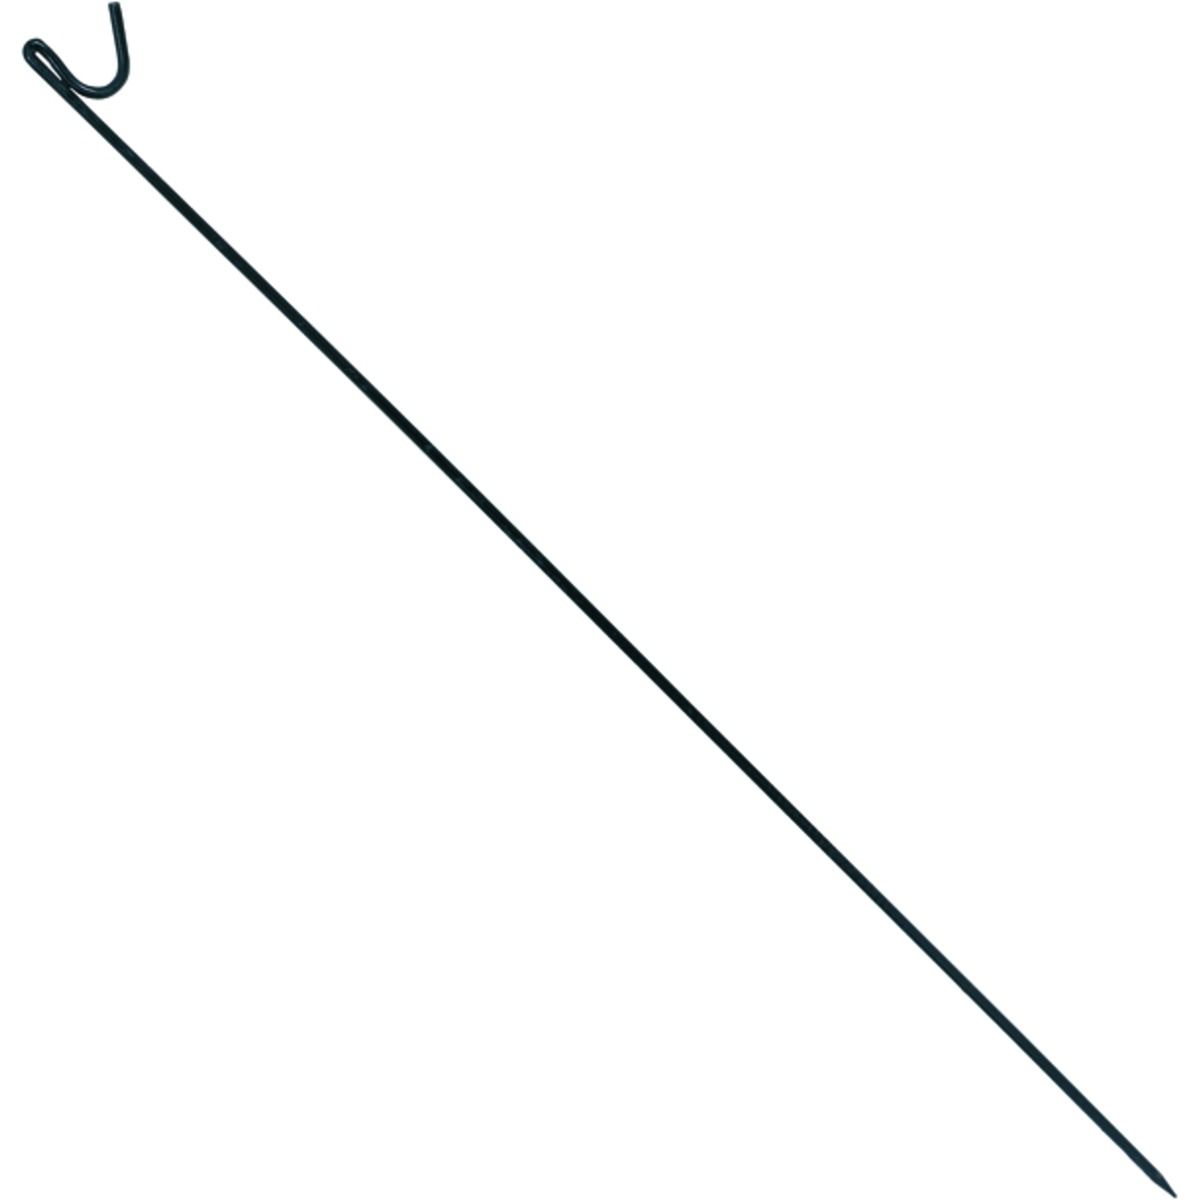 Image of Wickes Safety Fencing Stake Black - 1.3m